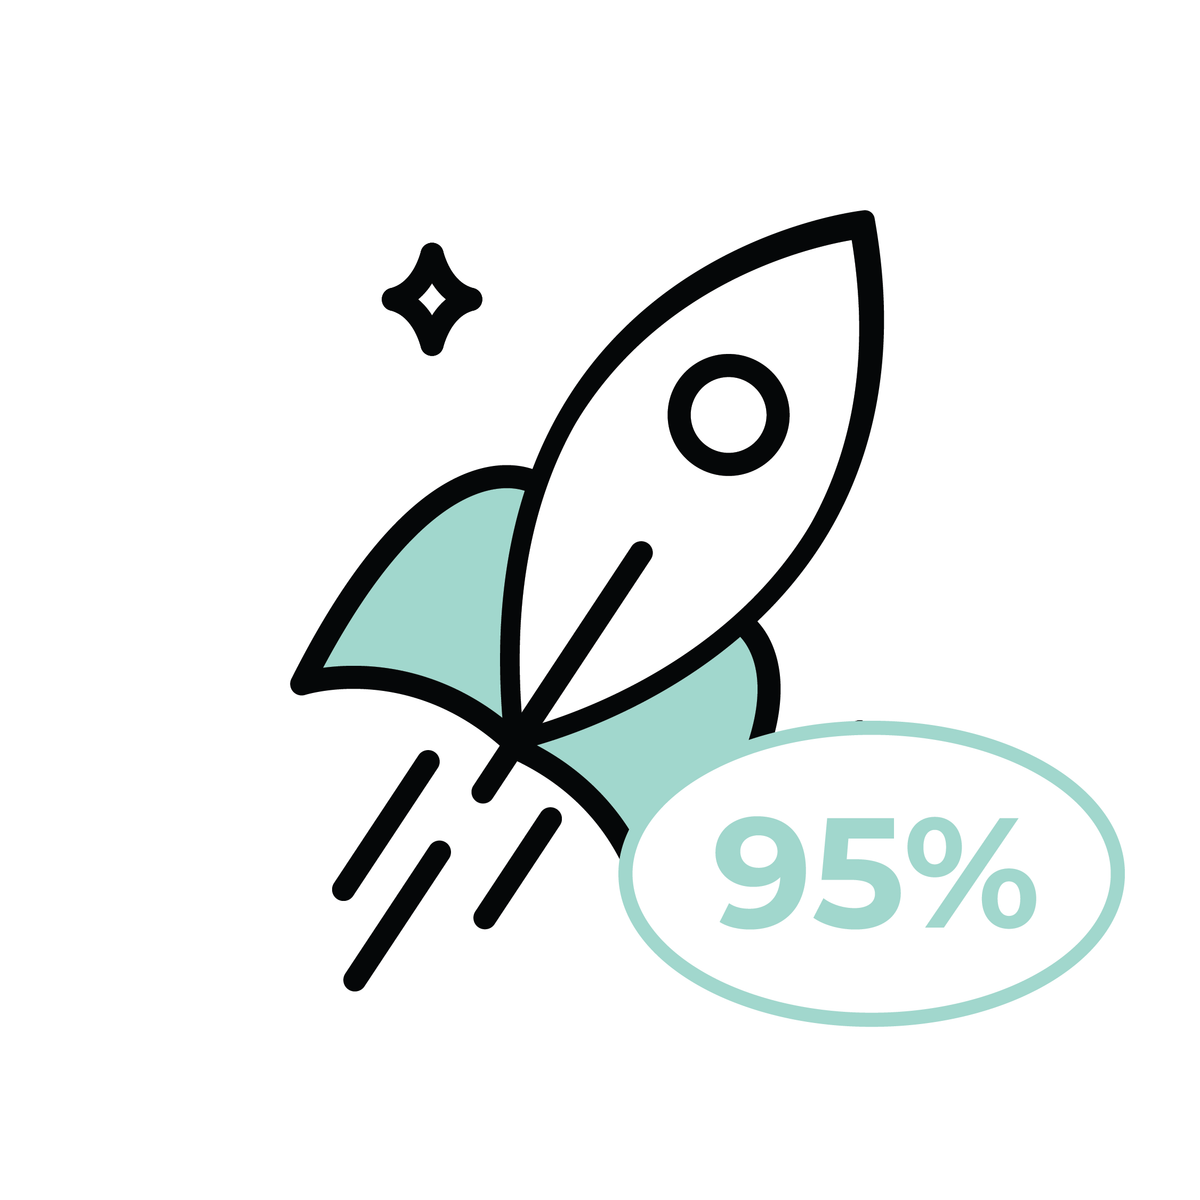 a teal rocket ship icon taking off with a bubble housing 95% to the bottom right